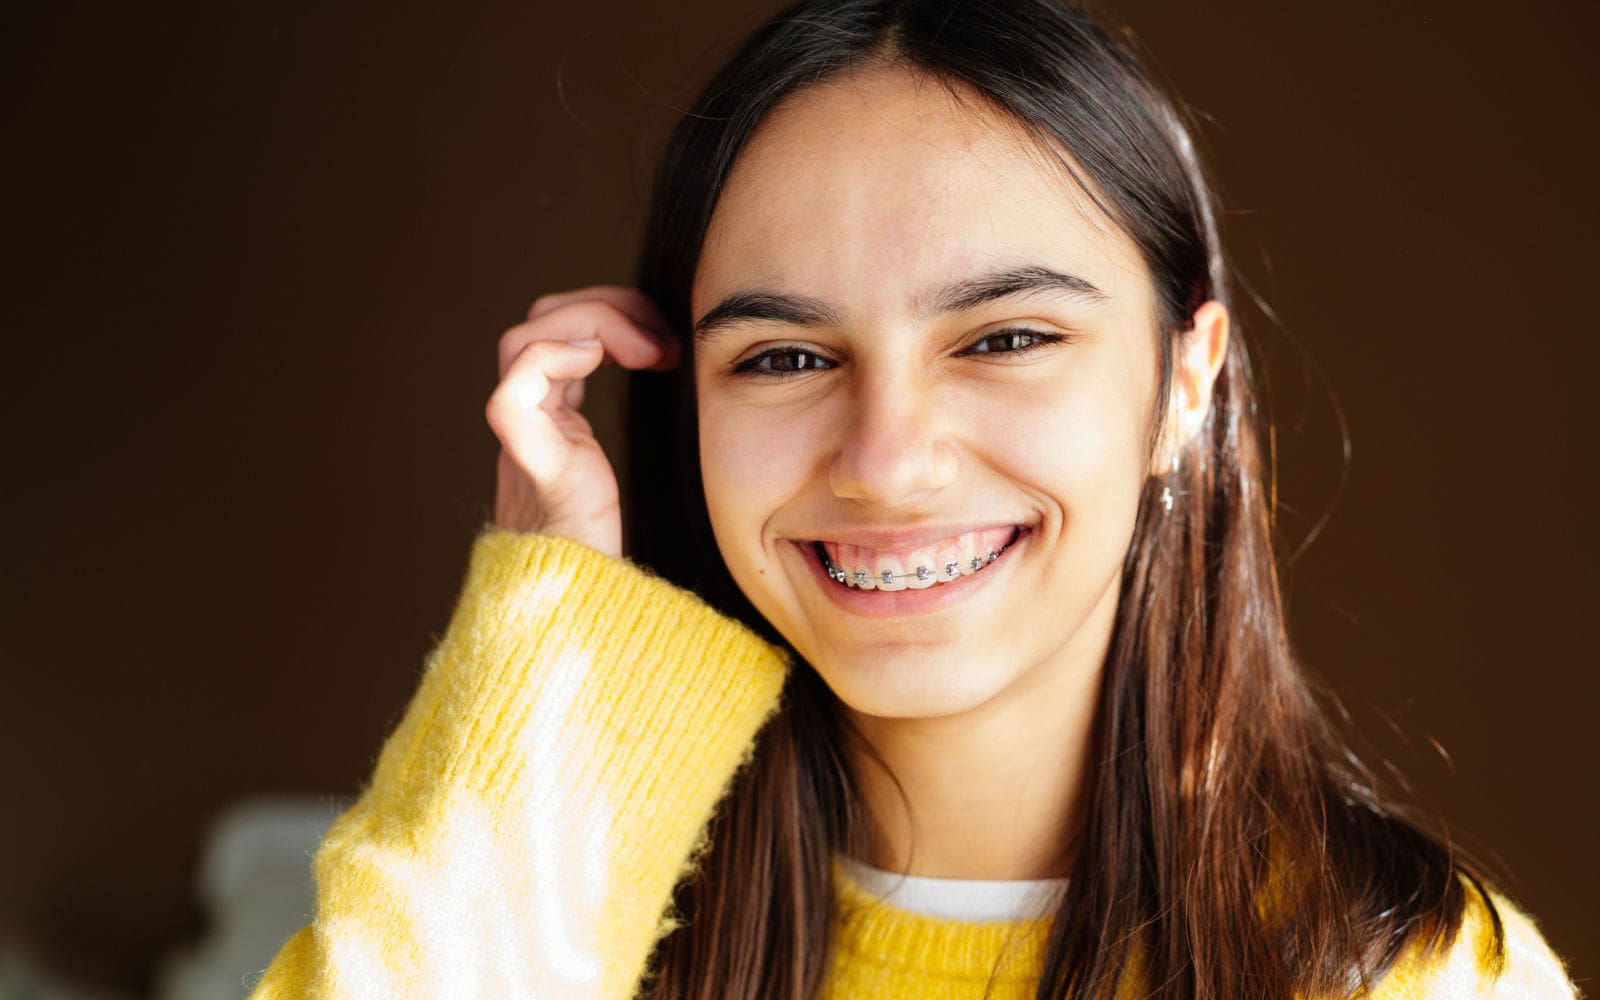 Smiling Young Woman With Braces